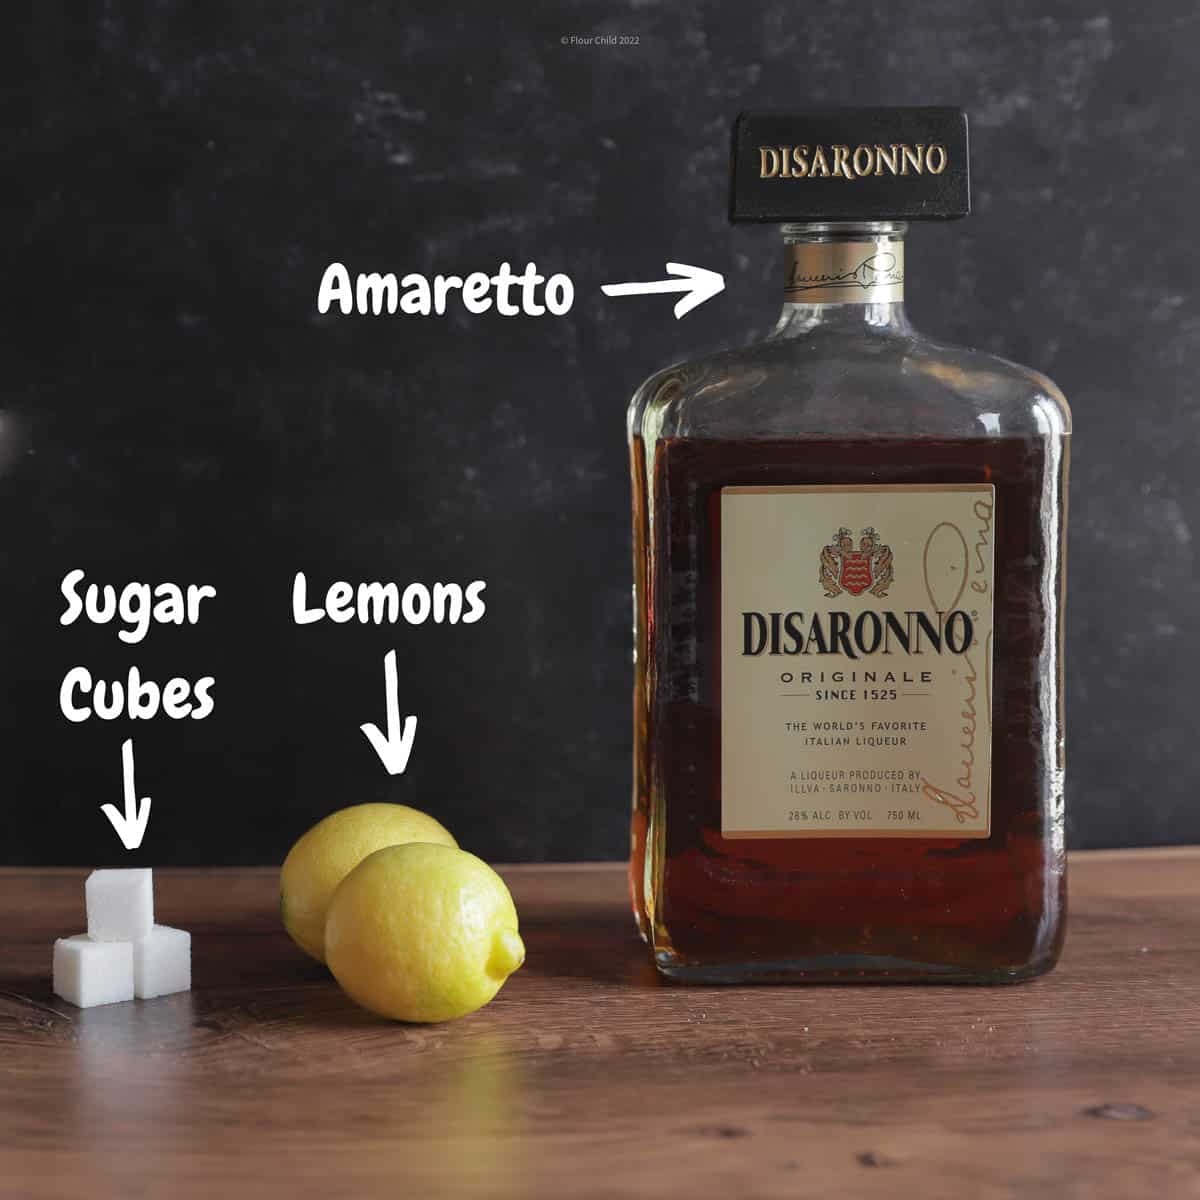 The three ingredients used to mix a sour, liqueur lemon and sugar